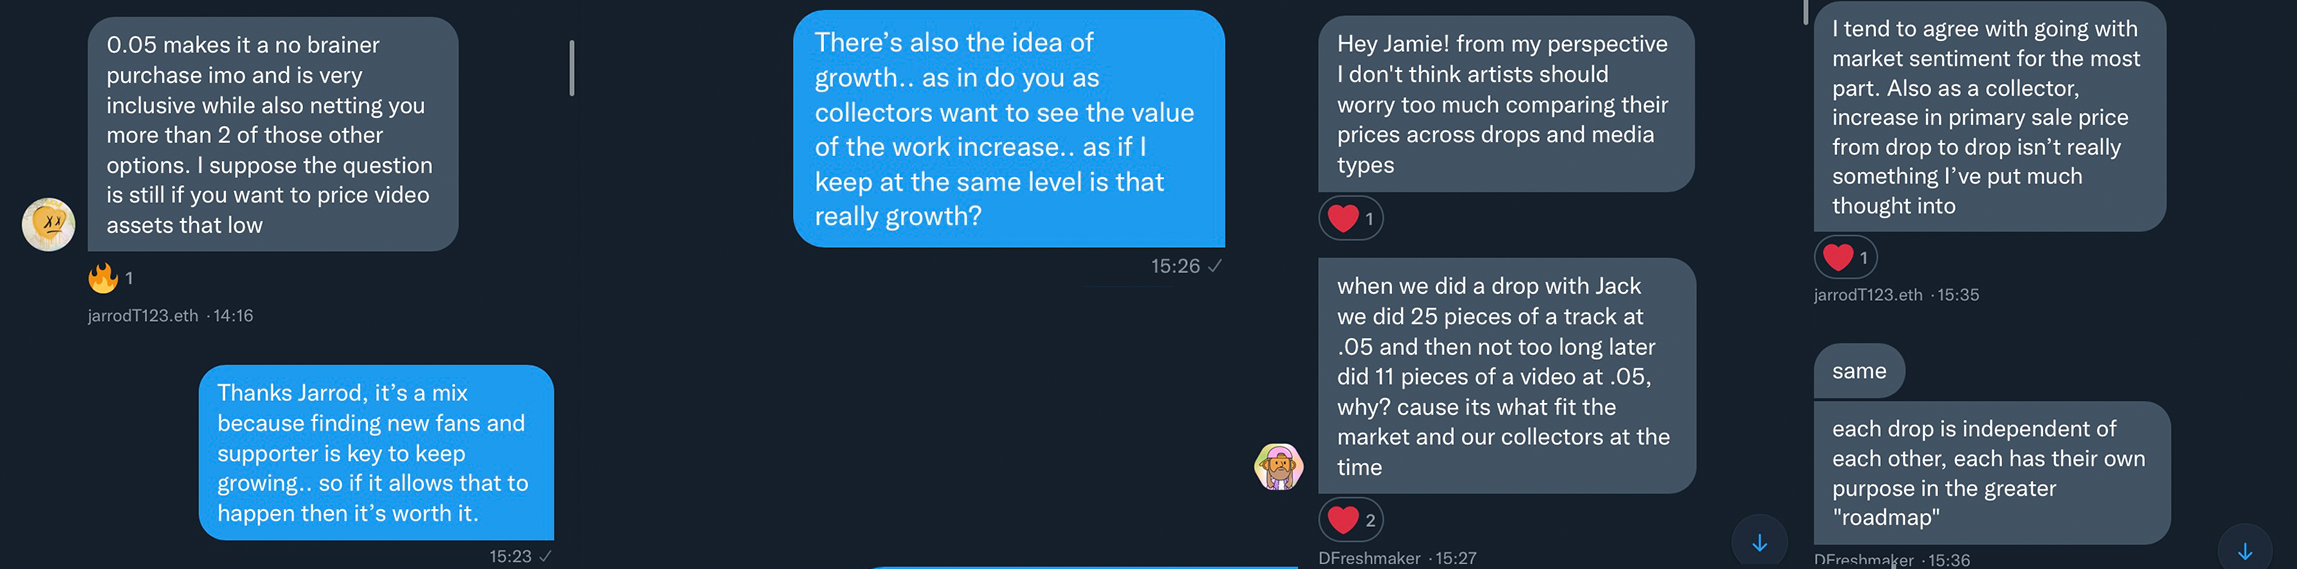 It was interesting to hear for me that the growth of price wasn't important to many collectors, its something that I used to hear a lot when i started out, probably because we were looking at PFP projects a lot more back then.